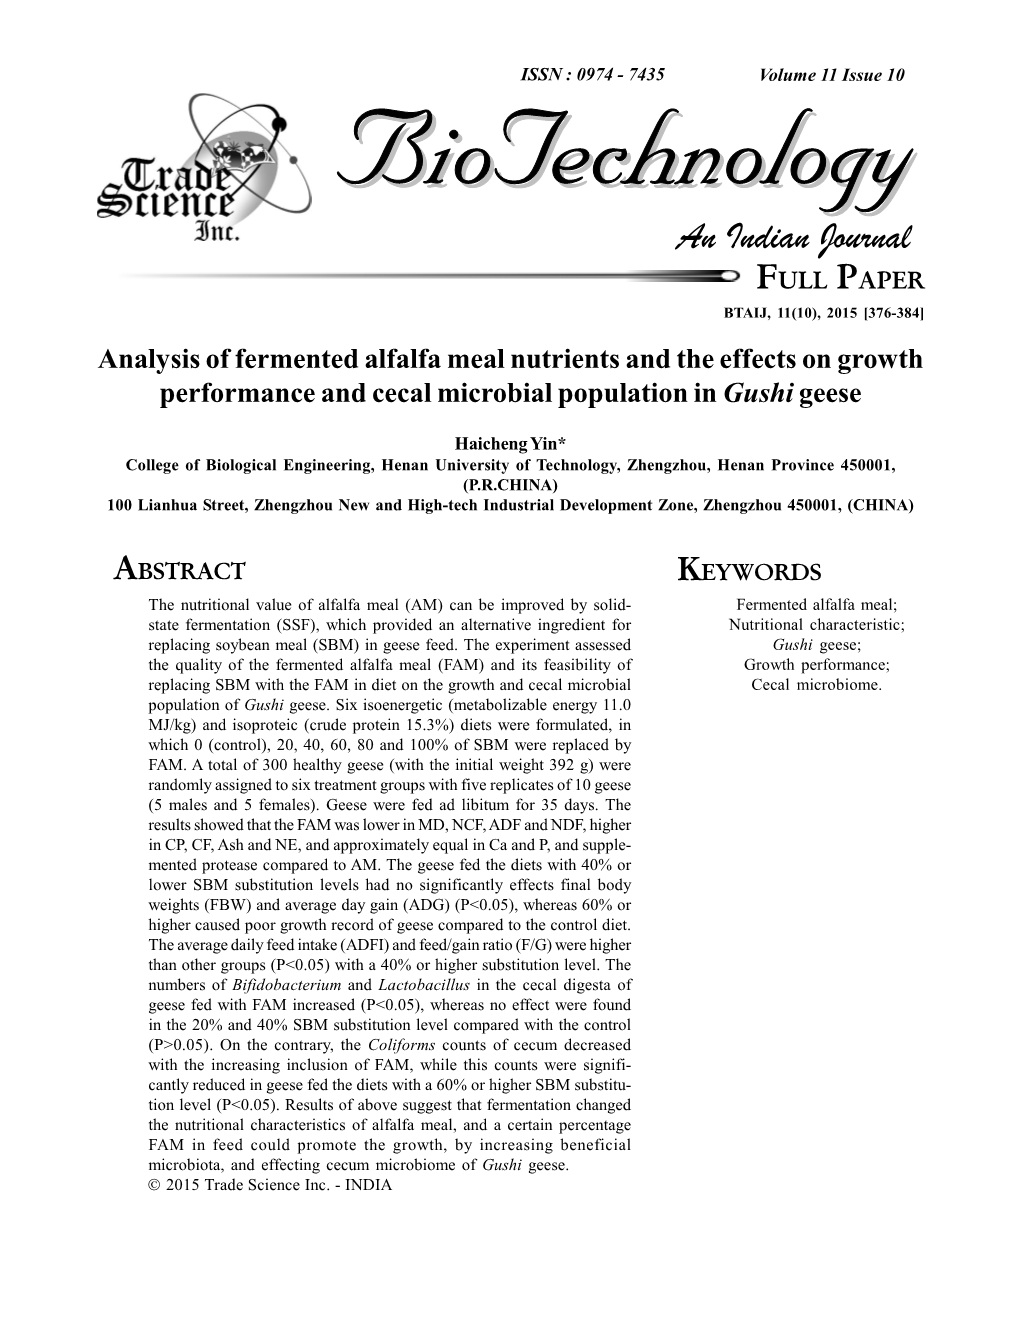 Analysis of Fermented Alfalfameal Nutrients And